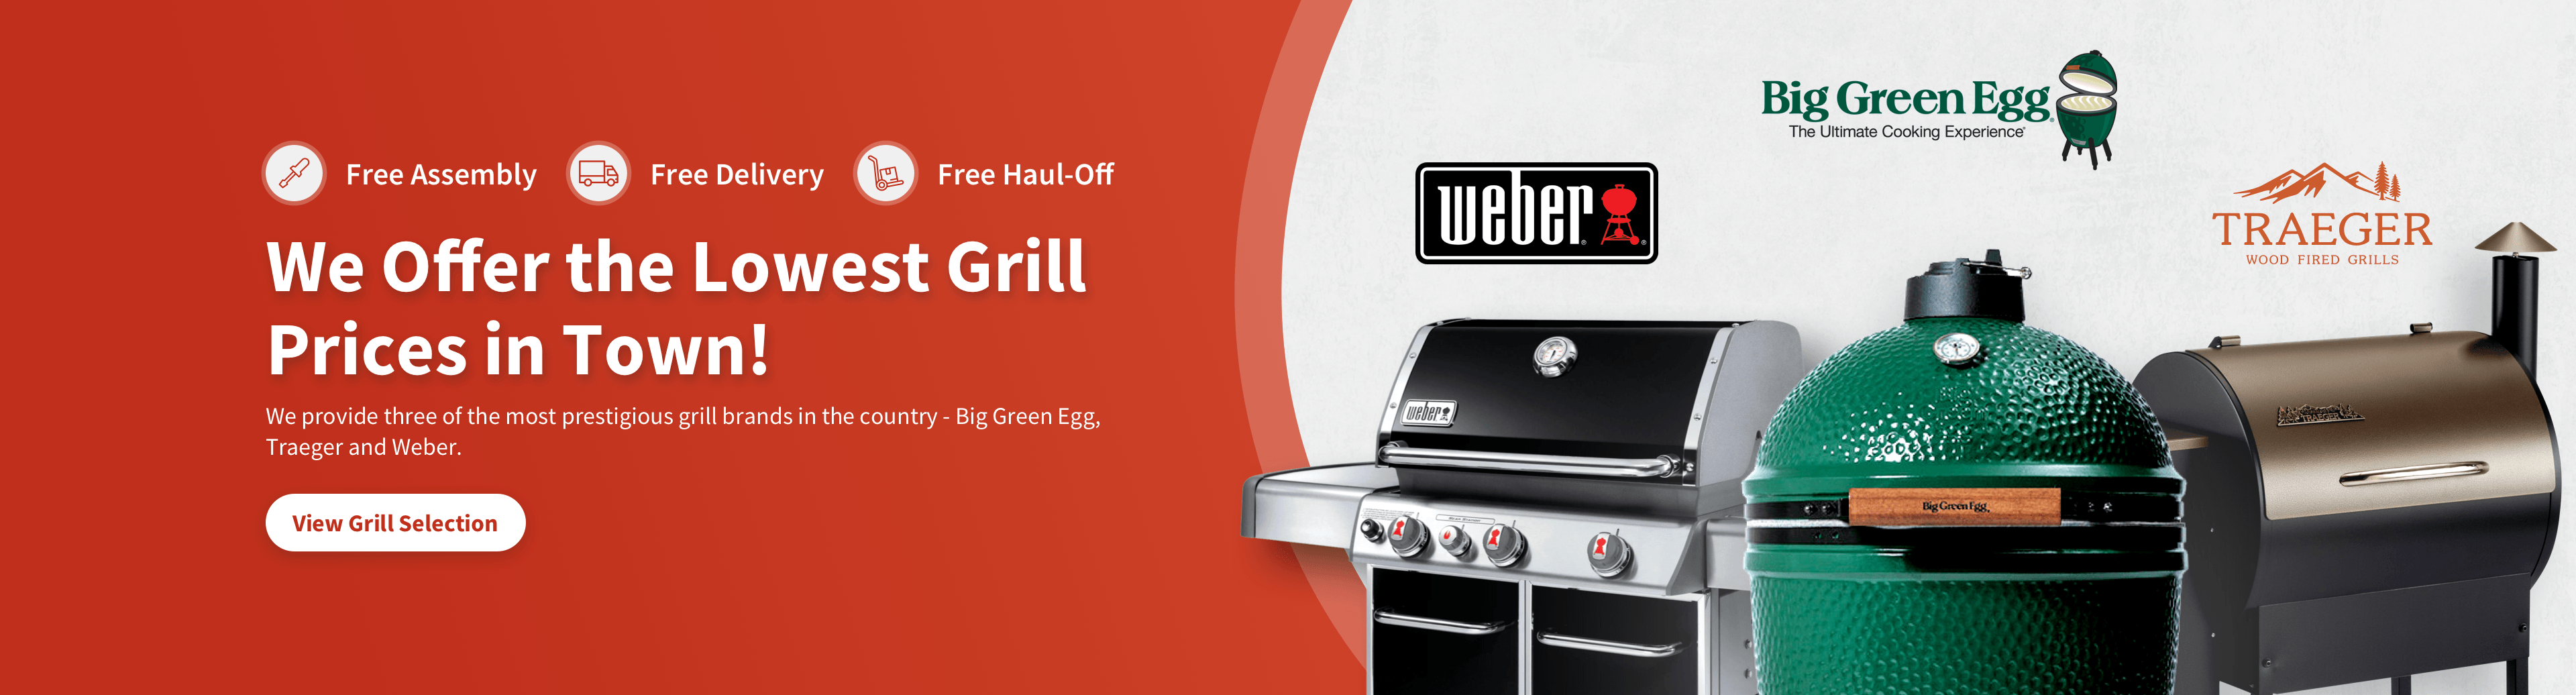 Shop Grills at Brownsboro Hardware. We Offer the Lowest Grill Prices in Town! Free Assembly. Free Delivery. Free Haul-Off. We provide three of the most prestigious grill brands in the country - Big Green Egg, Traeger and Weber. View Grill Selection.